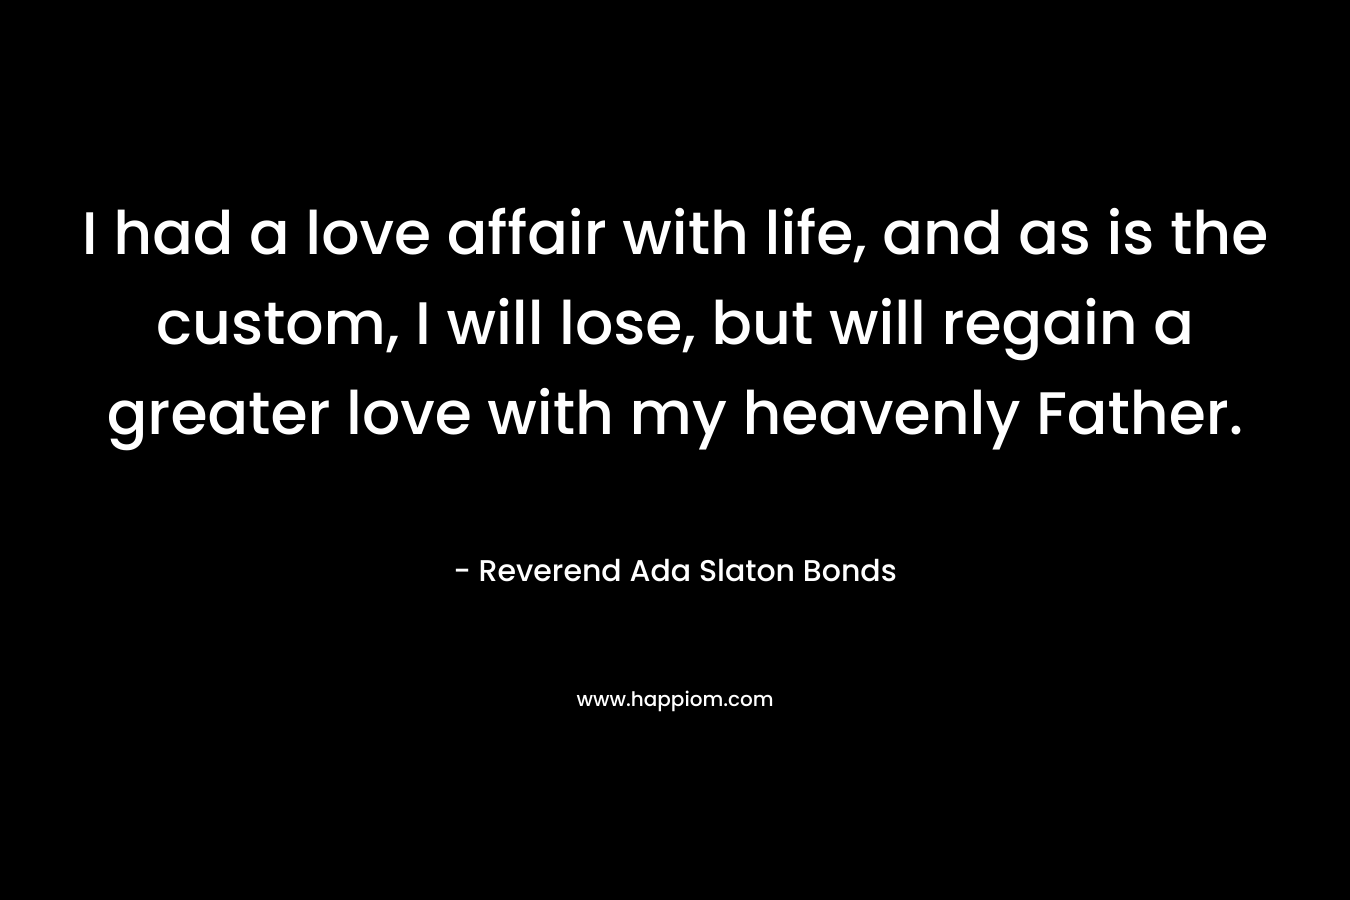 I had a love affair with life, and as is the custom, I will lose, but will regain a greater love with my heavenly Father. – Reverend Ada Slaton Bonds